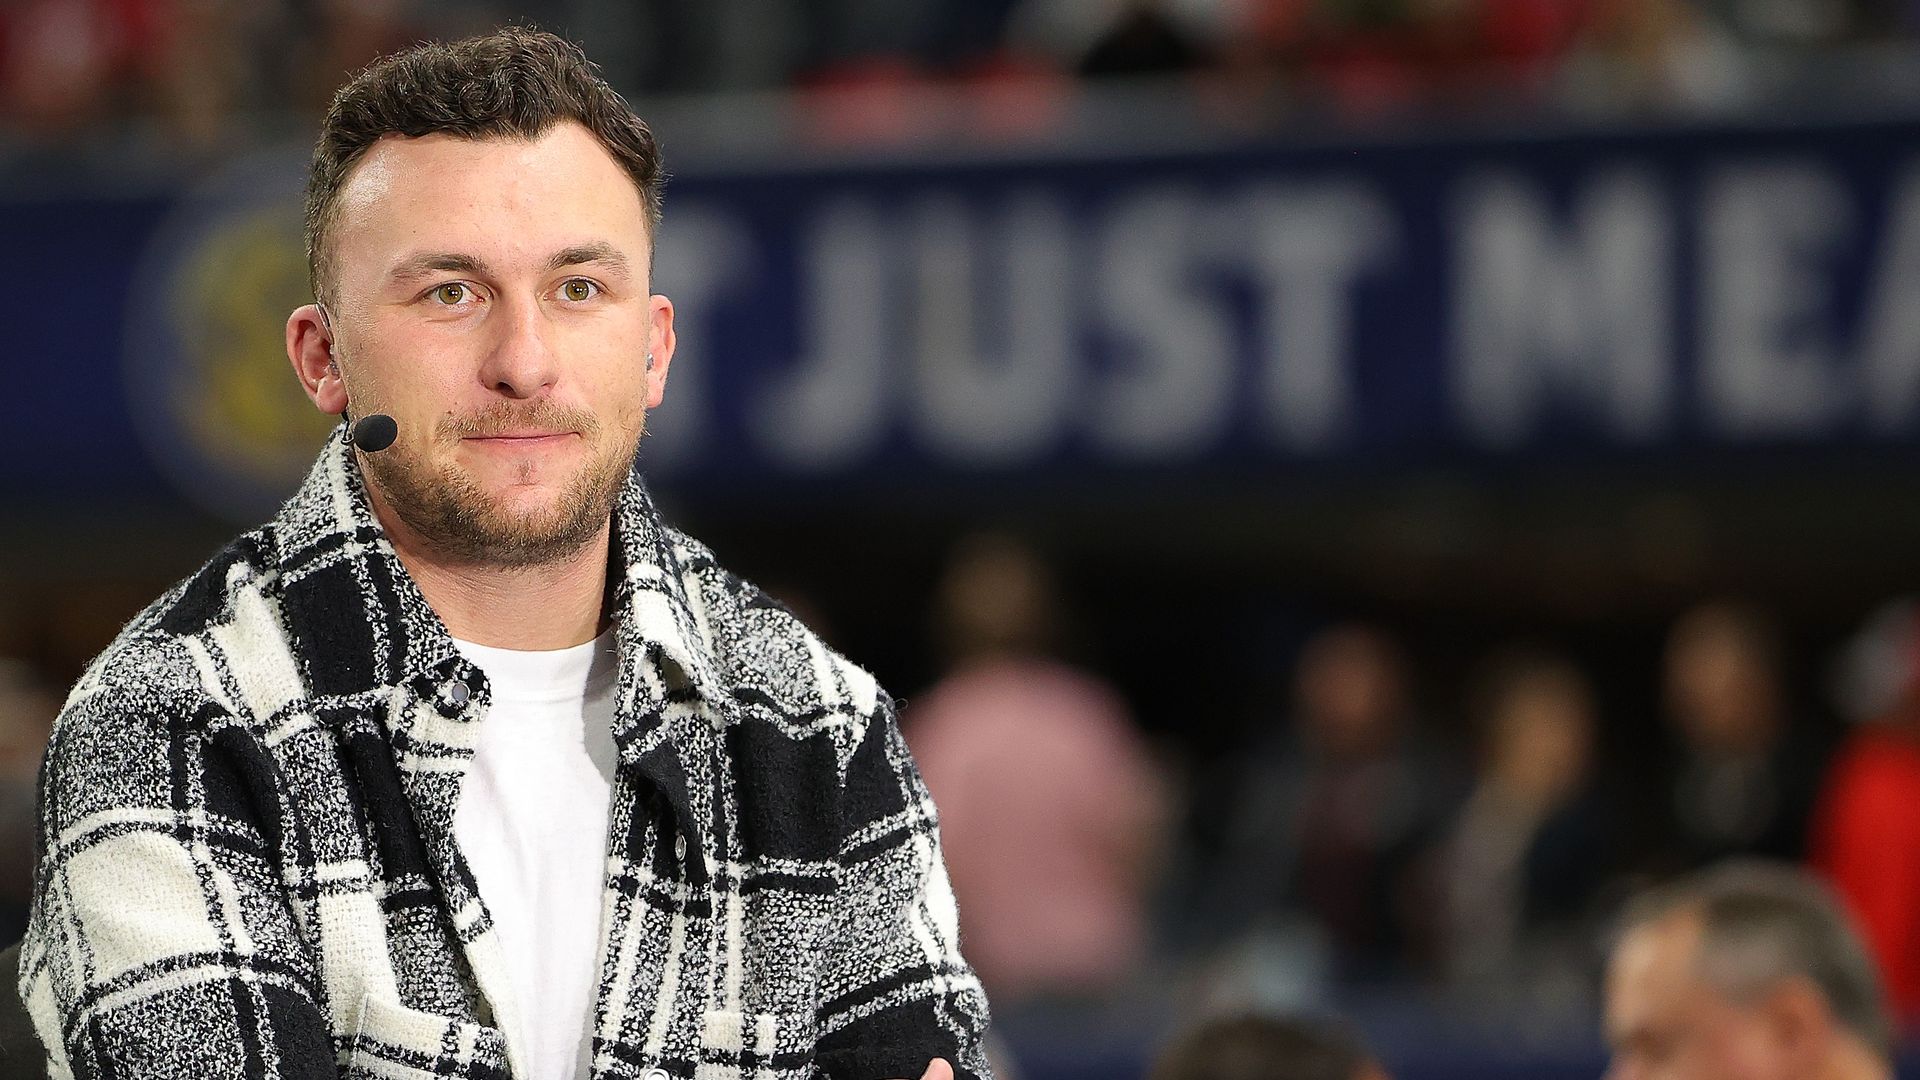 Johnny Manziel, wearing a plaid shirt, sits at a desk at a sporting event with a microphone attached to his head. 